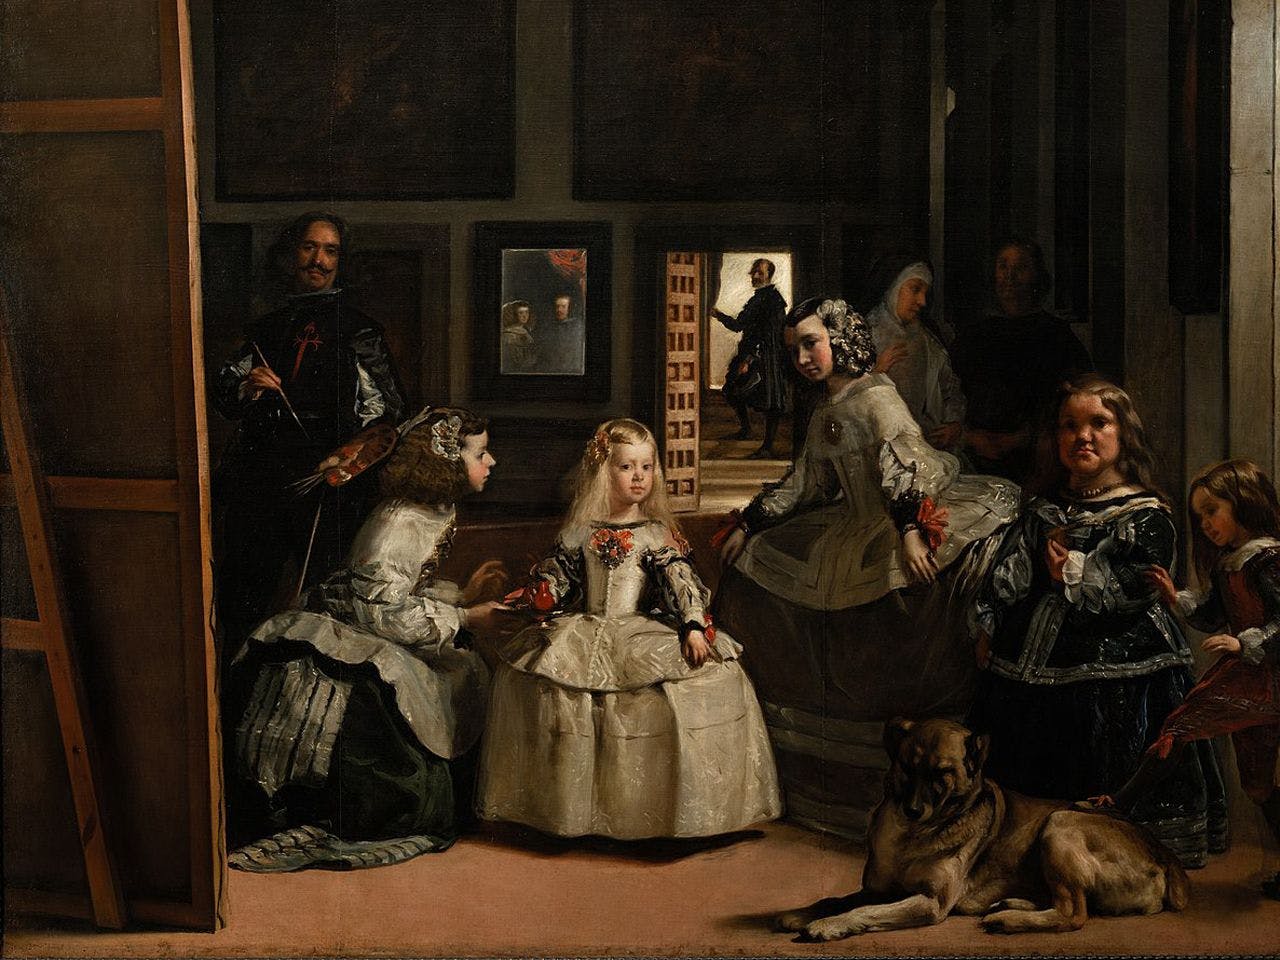 An artwork by Diego Velázquez, titled Las Meninas, dated 1656